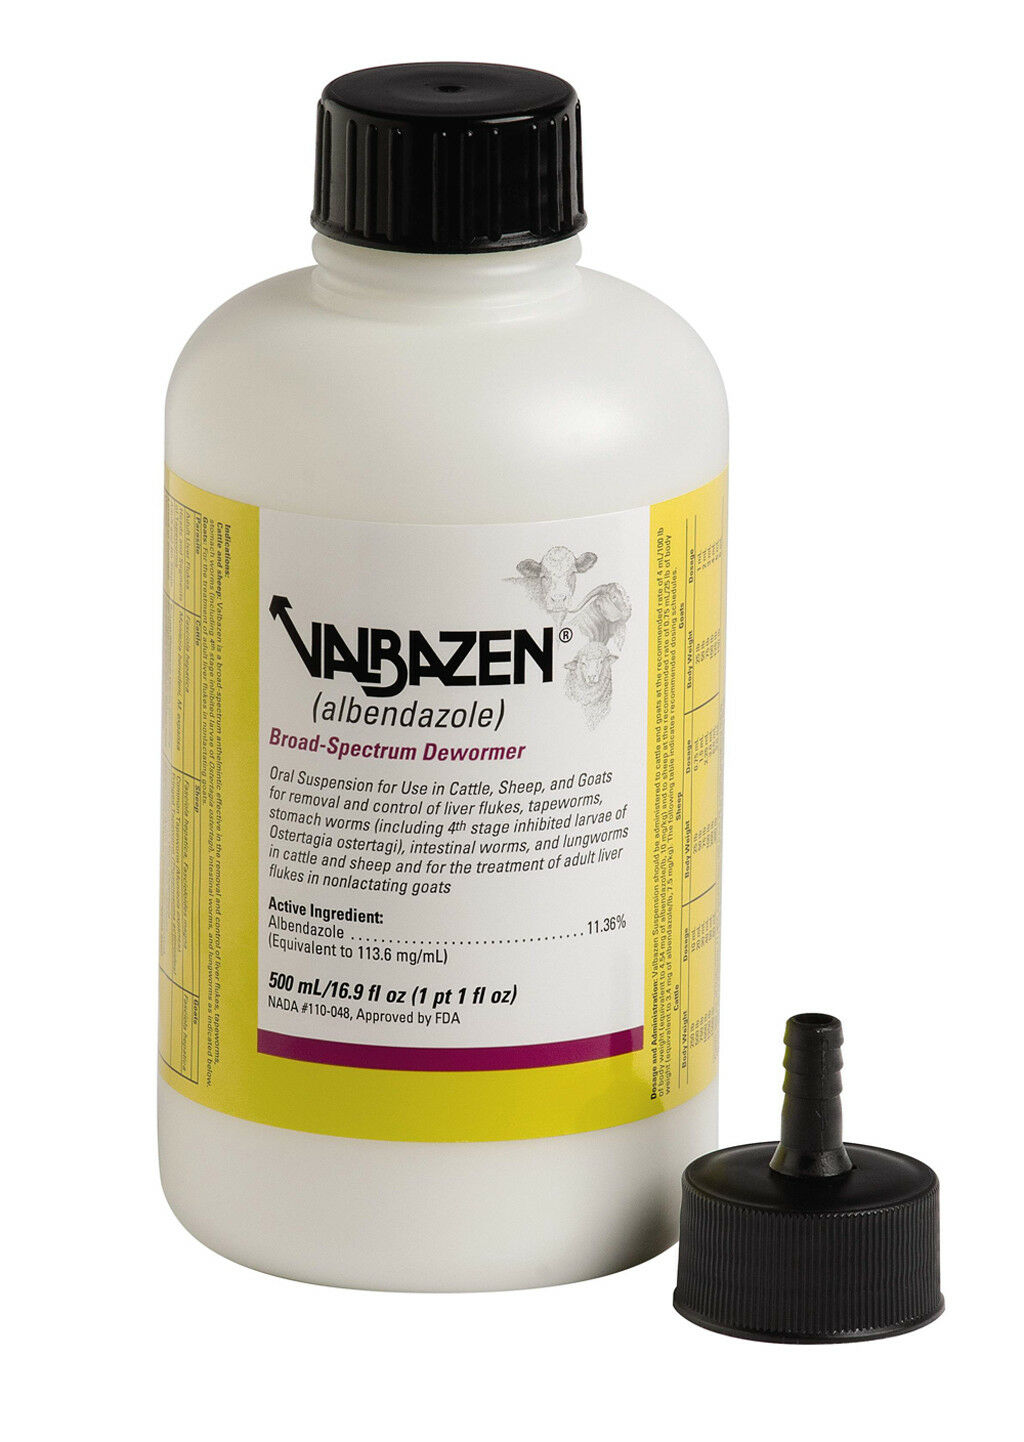 Valbazen Drench Dewormer for Dogs – Product Review – Total Pooch